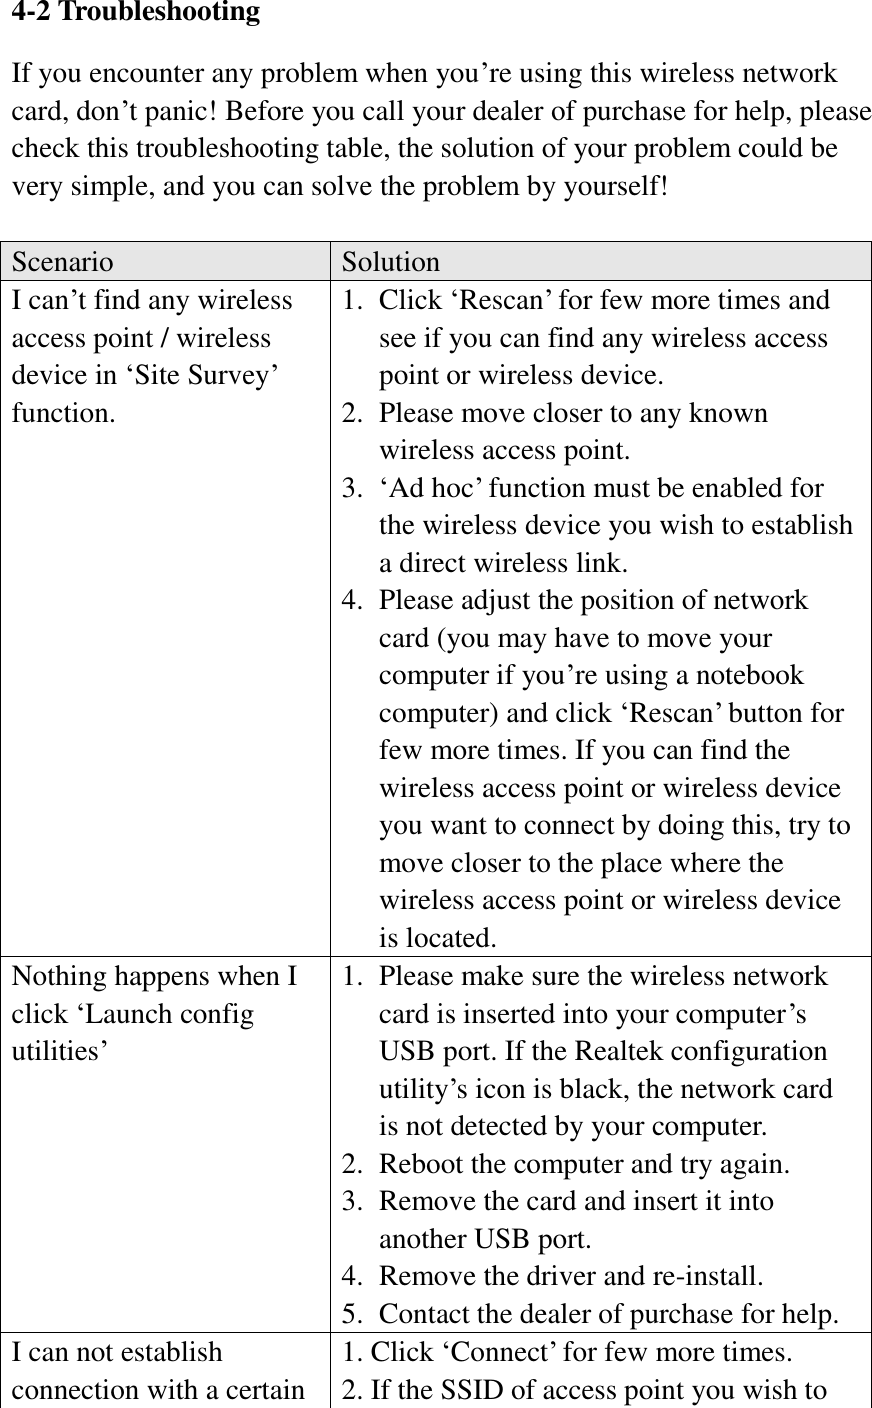 4-2 Troubleshooting If you encounter any problem when you’re using this wireless network card, don’t panic! Before you call your dealer of purchase for help, please check this troubleshooting table, the solution of your problem could be very simple, and you can solve the problem by yourself!  Scenario Solution I can’t find any wireless access point / wireless device in ‘Site Survey’ function. 1. Click ‘Rescan’ for few more times and see if you can find any wireless access point or wireless device. 2. Please move closer to any known wireless access point. 3. ‘Ad hoc’ function must be enabled for the wireless device you wish to establish a direct wireless link. 4. Please adjust the position of network card (you may have to move your computer if you’re using a notebook computer) and click ‘Rescan’ button for few more times. If you can find the wireless access point or wireless device you want to connect by doing this, try to move closer to the place where the wireless access point or wireless device is located. Nothing happens when I click ‘Launch config utilities’ 1. Please make sure the wireless network card is inserted into your computer’s USB port. If the Realtek configuration utility’s icon is black, the network card is not detected by your computer. 2. Reboot the computer and try again. 3. Remove the card and insert it into another USB port. 4. Remove the driver and re-install. 5. Contact the dealer of purchase for help. I can not establish connection with a certain 1. Click ‘Connect’ for few more times. 2. If the SSID of access point you wish to 